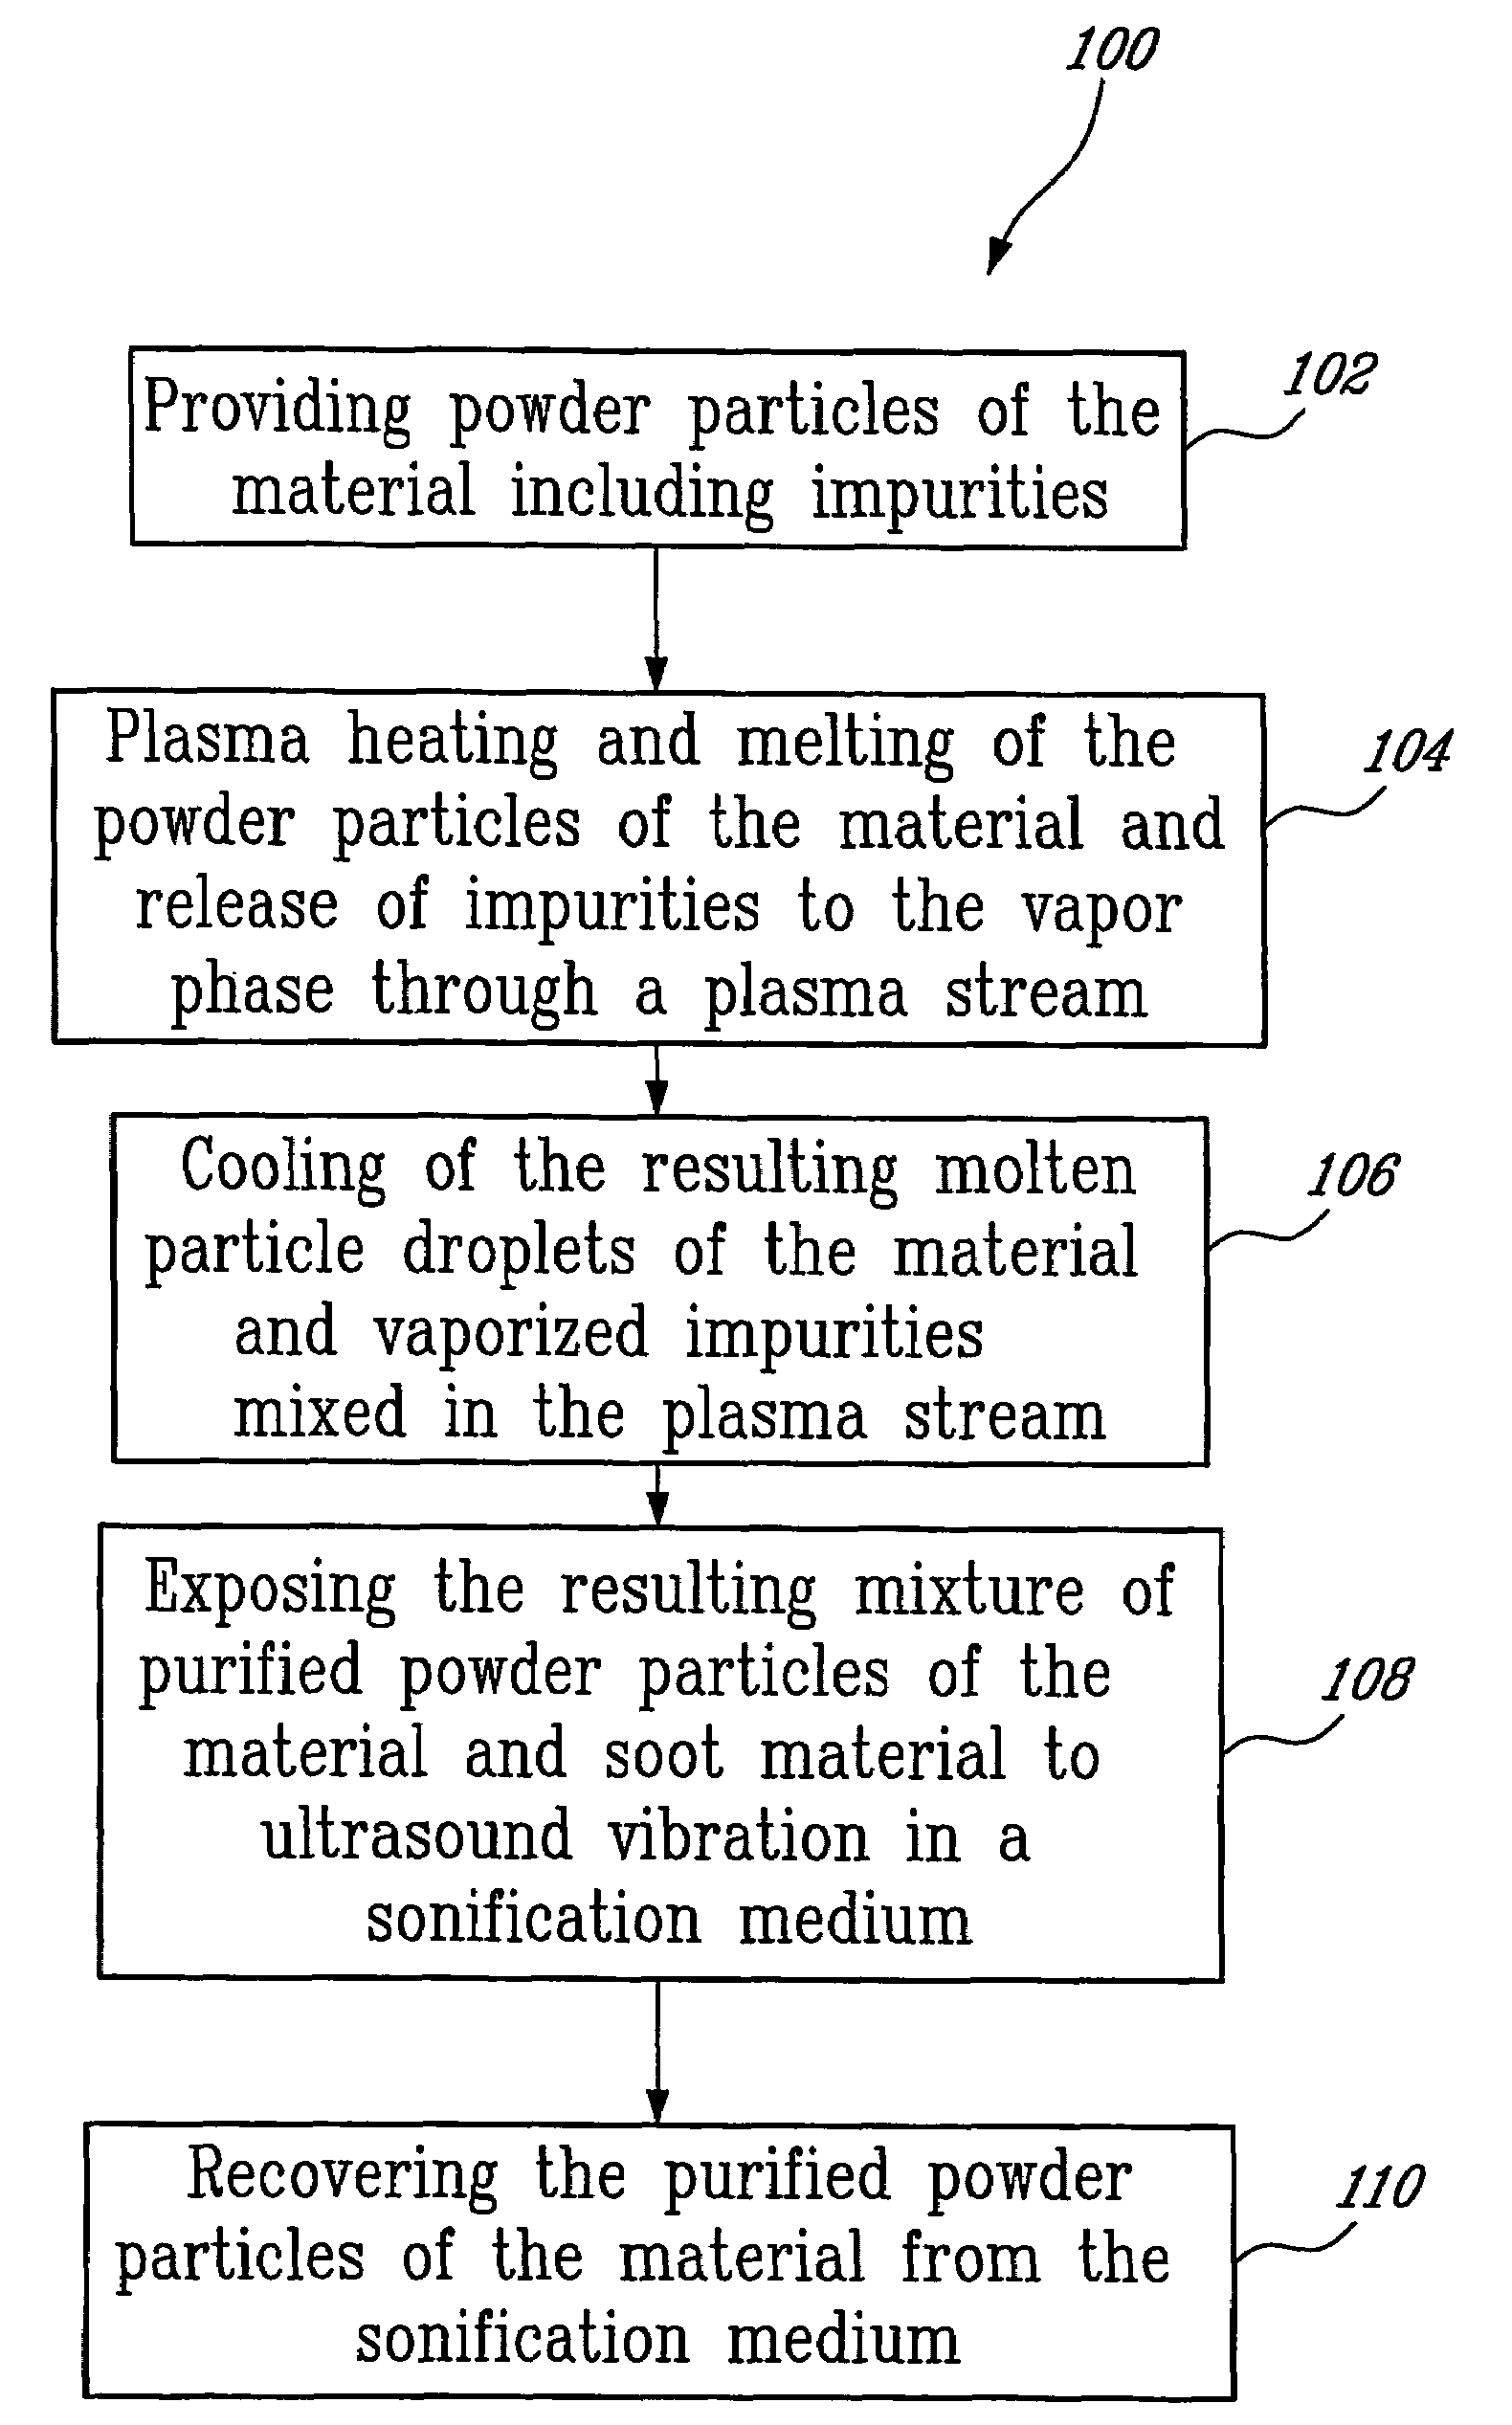 Process for the synthesis, separation and purification of powder materials